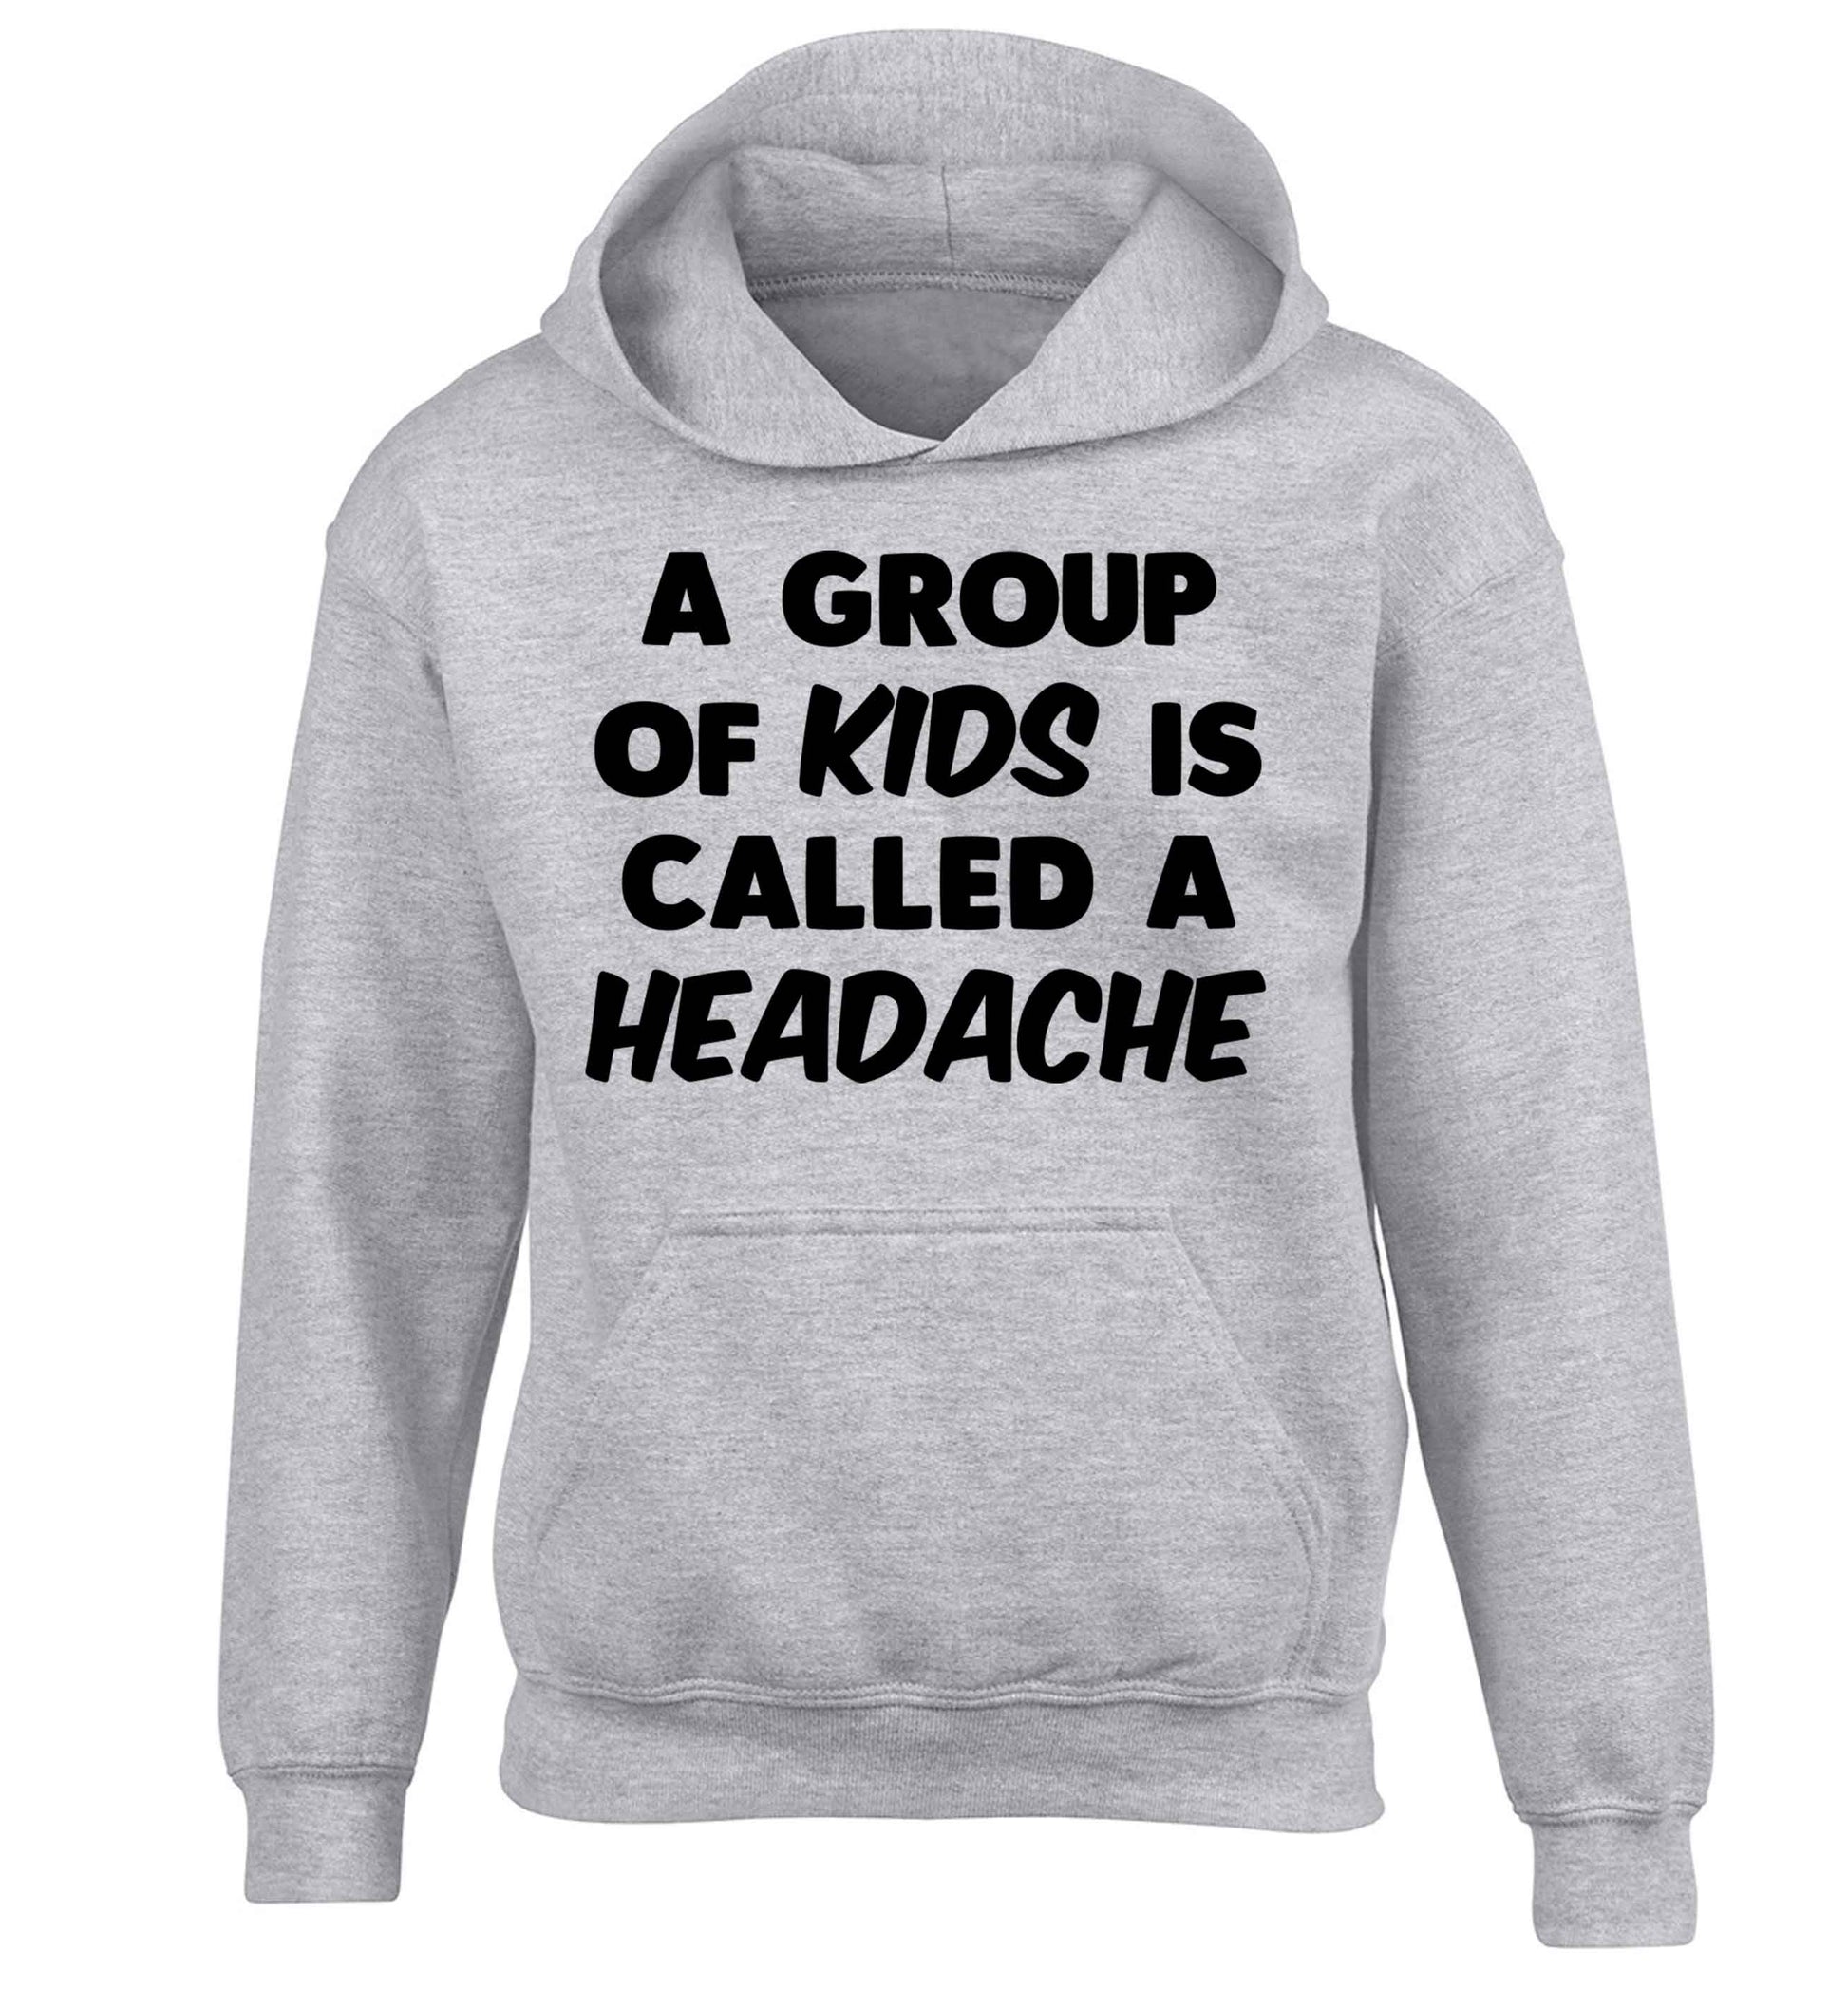 A group of kids is called a headache children's grey hoodie 12-13 Years